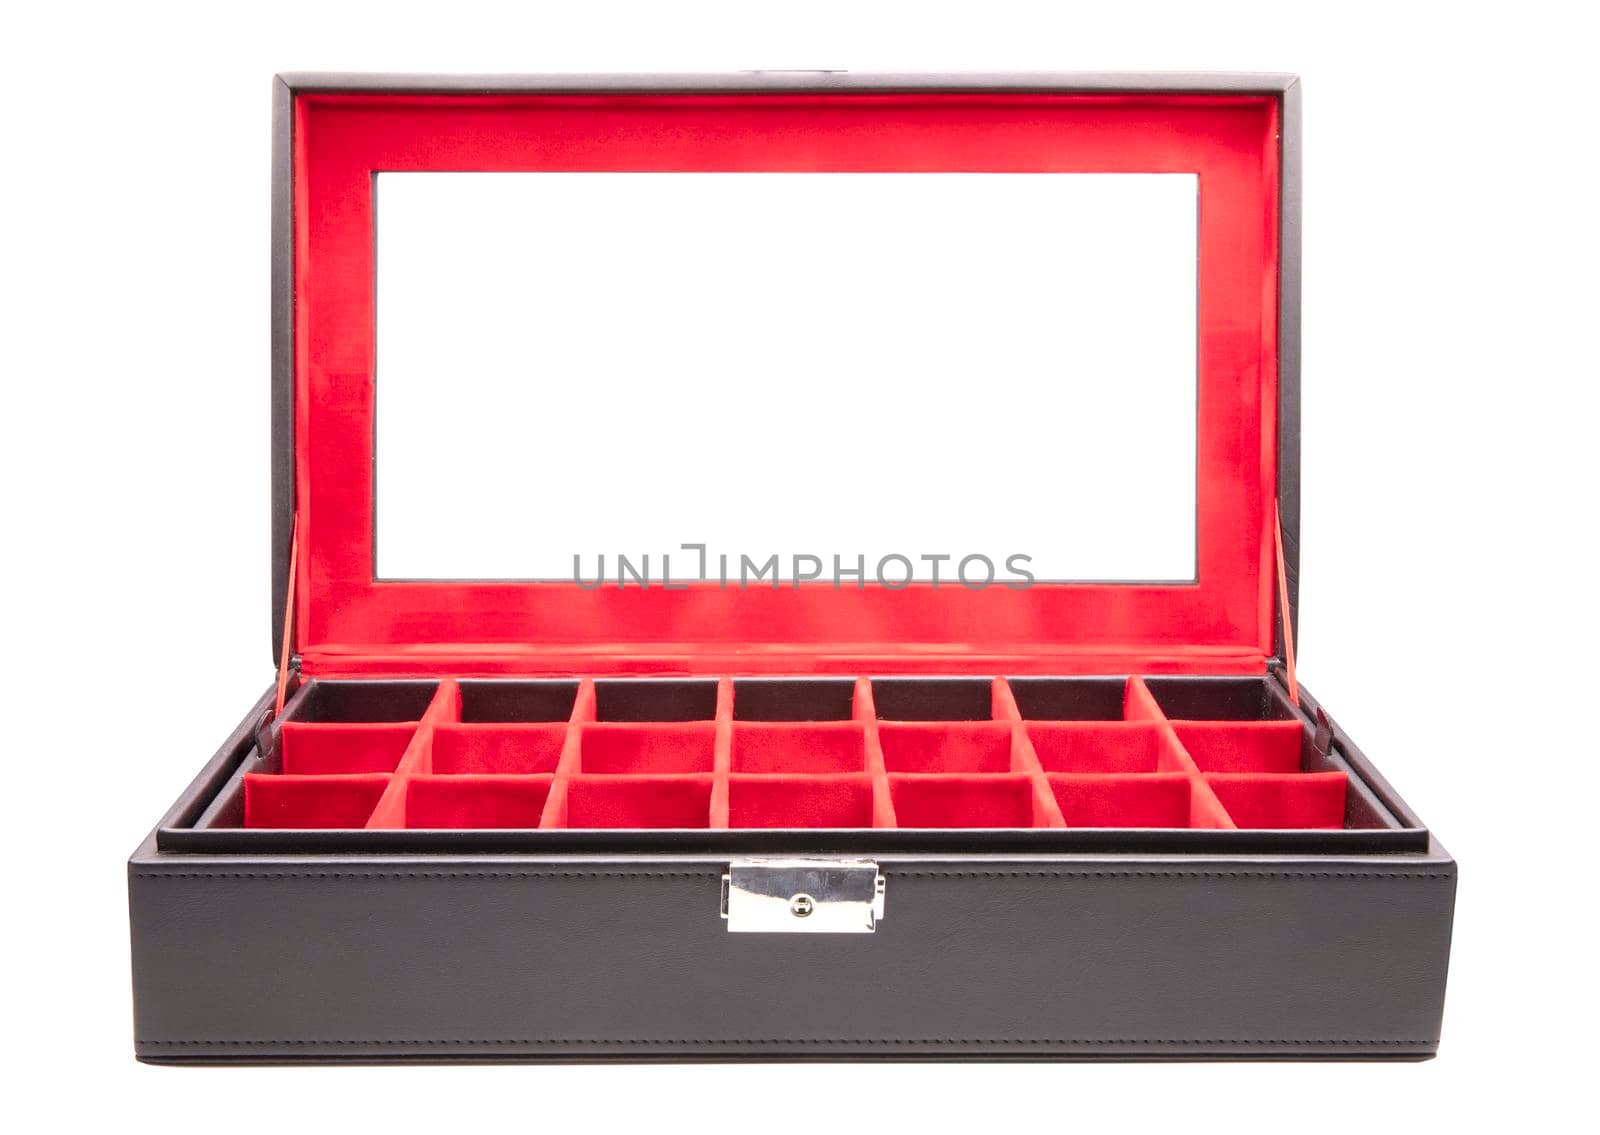 Opened leather box with red velvet interior